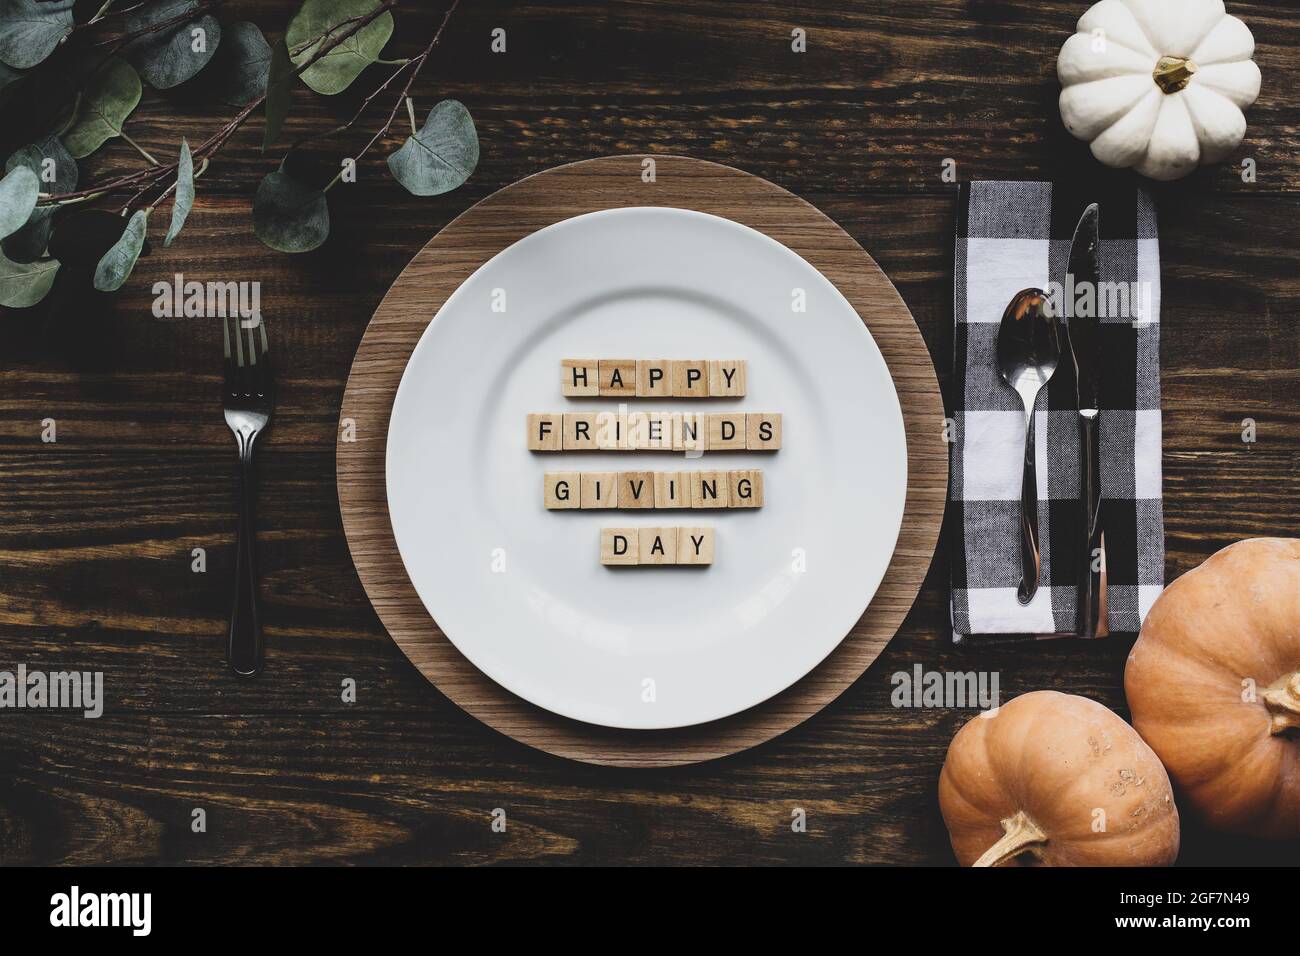 Thanksgiving place setting with plate, napkin, on a  decorated table shot from flat lay or top view position. Happy Friendsgiving Day spelled out with Stock Photo